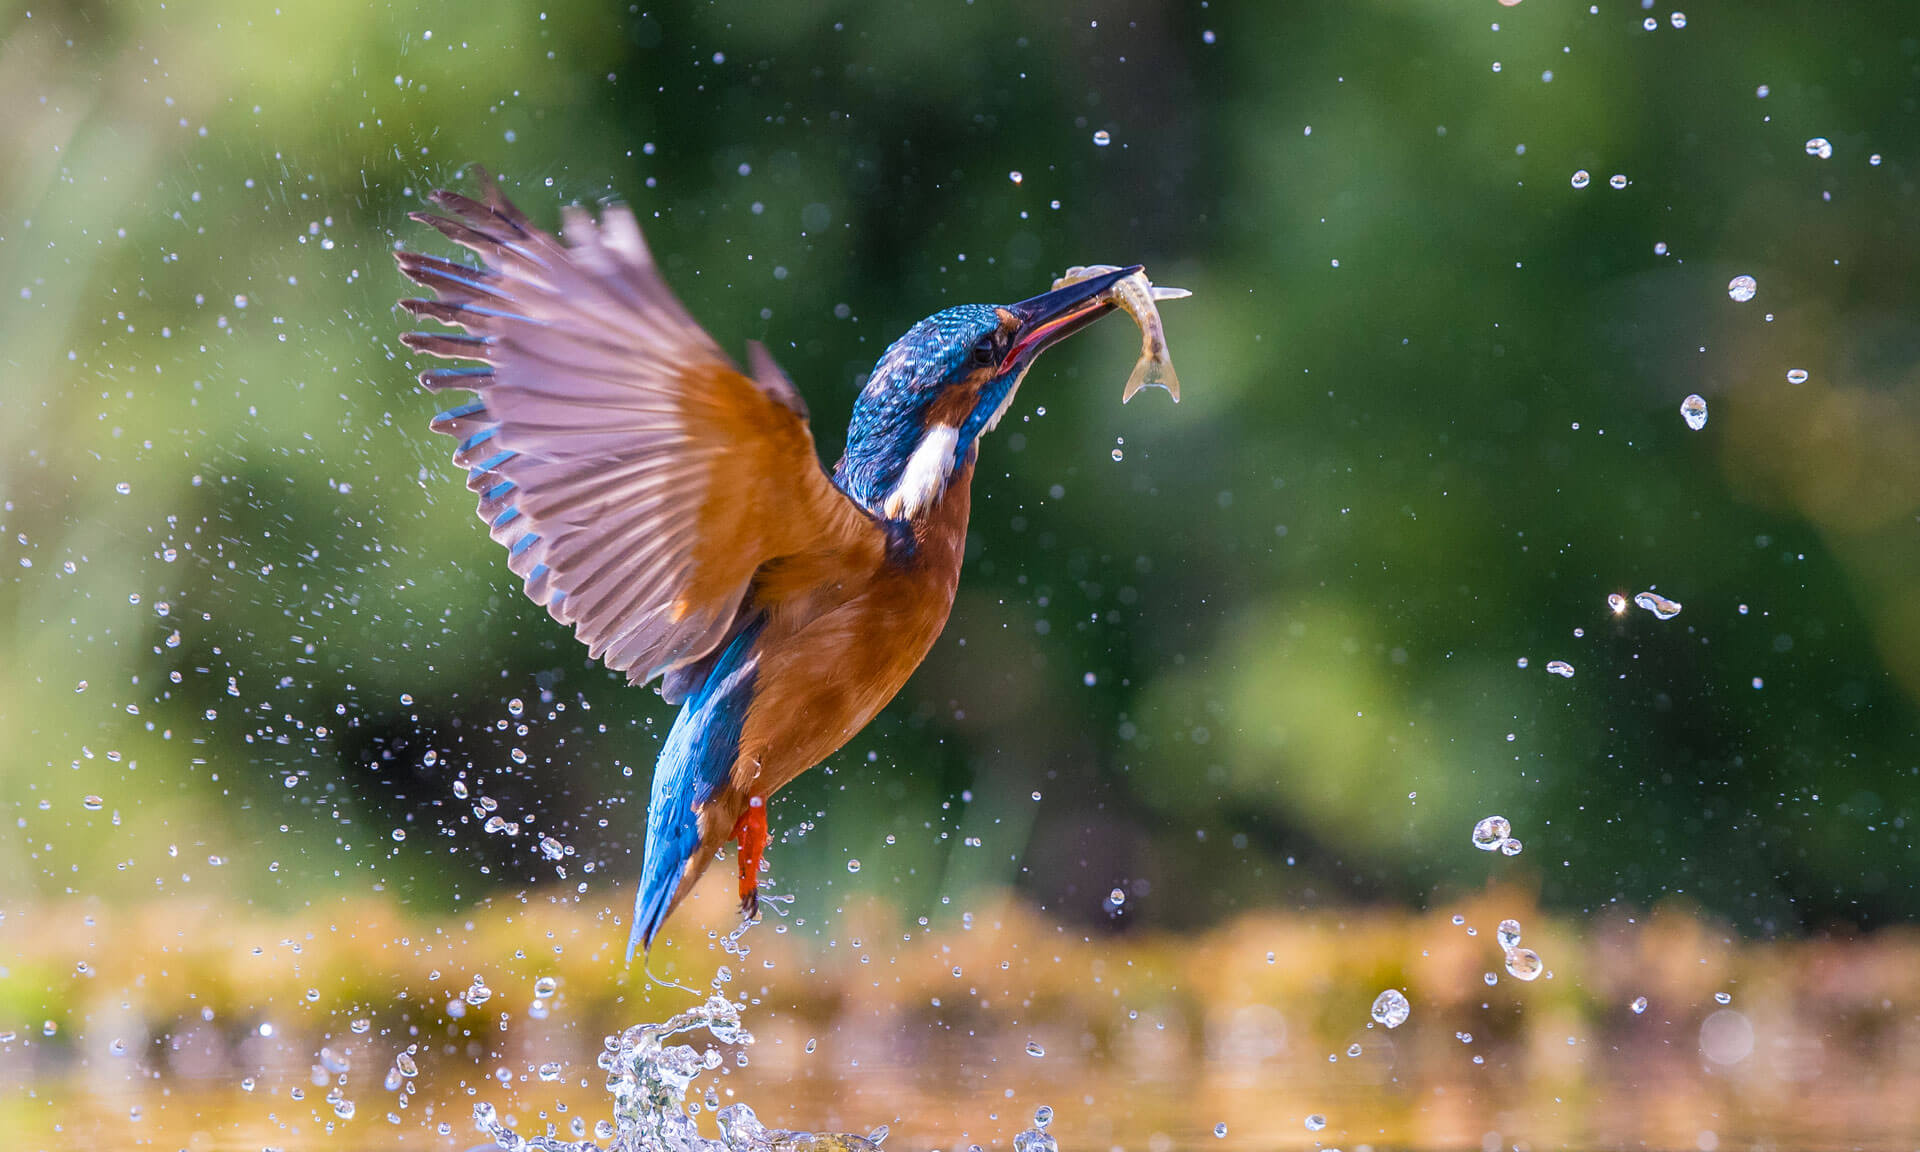 5 Best Budget Lenses For Bird Photography (Reviewed)